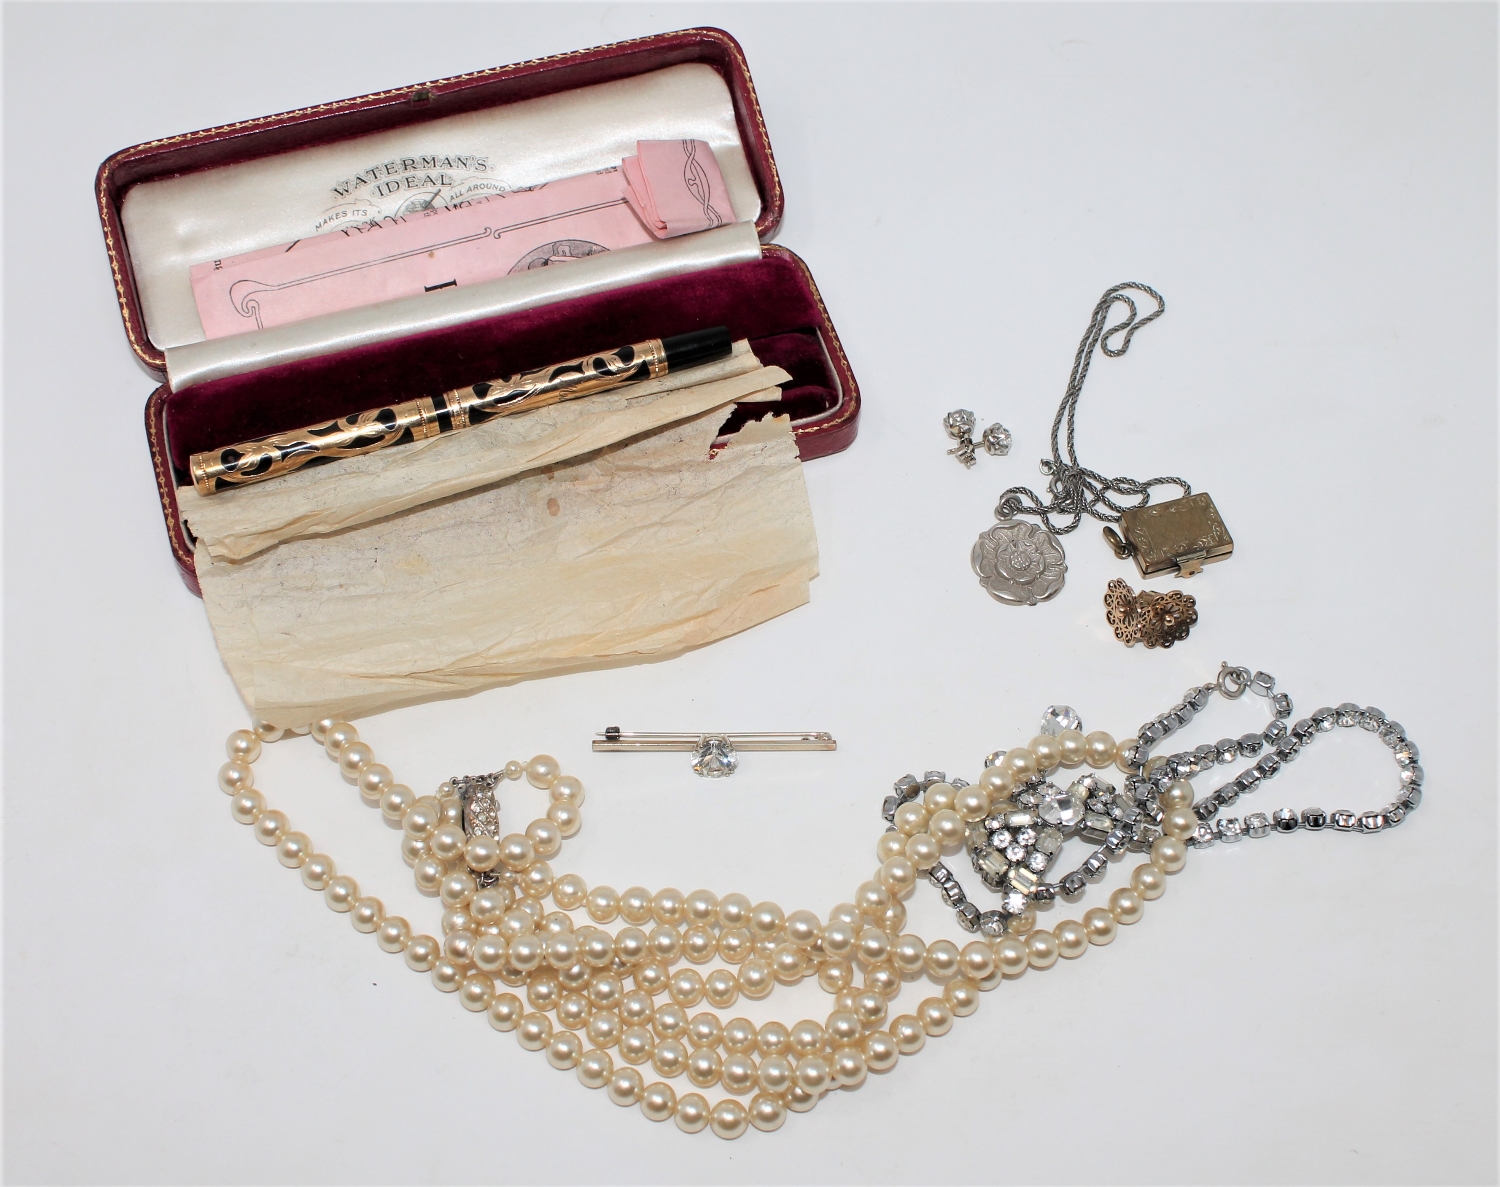 A boxed Waterman's Ideal yellow metal mounted fountain pen, together with a costume pearl necklace,